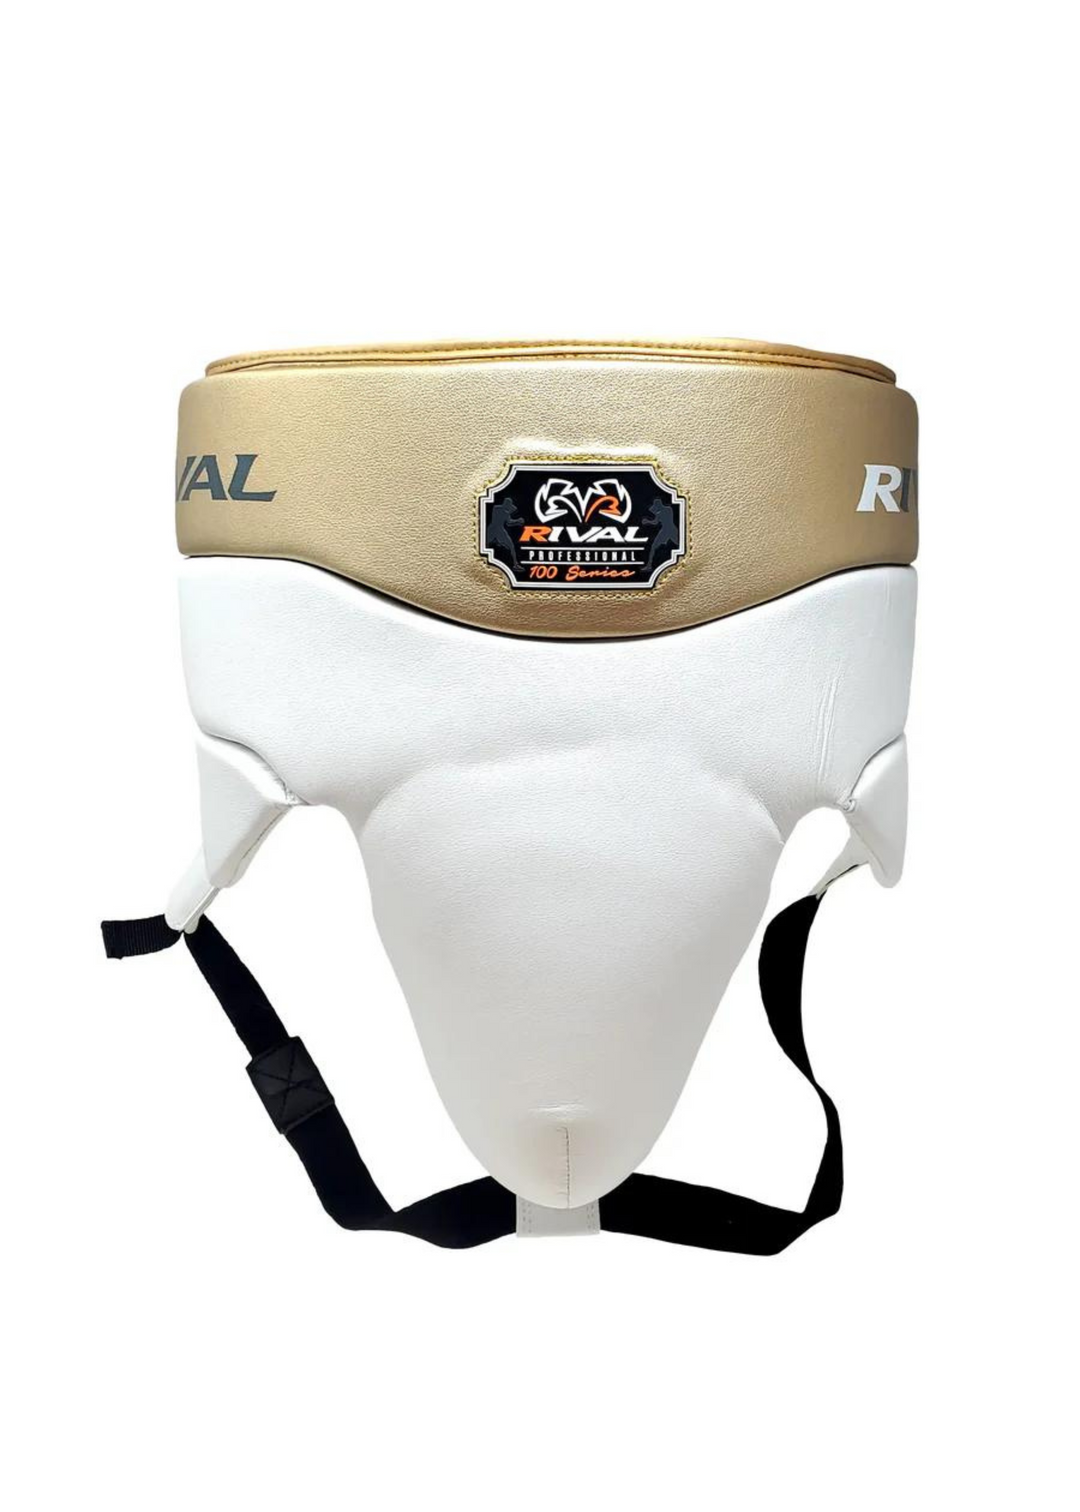 RIVAL RNFL100 PROFESSIONAL PROTECTOR - WHITE/GOLD